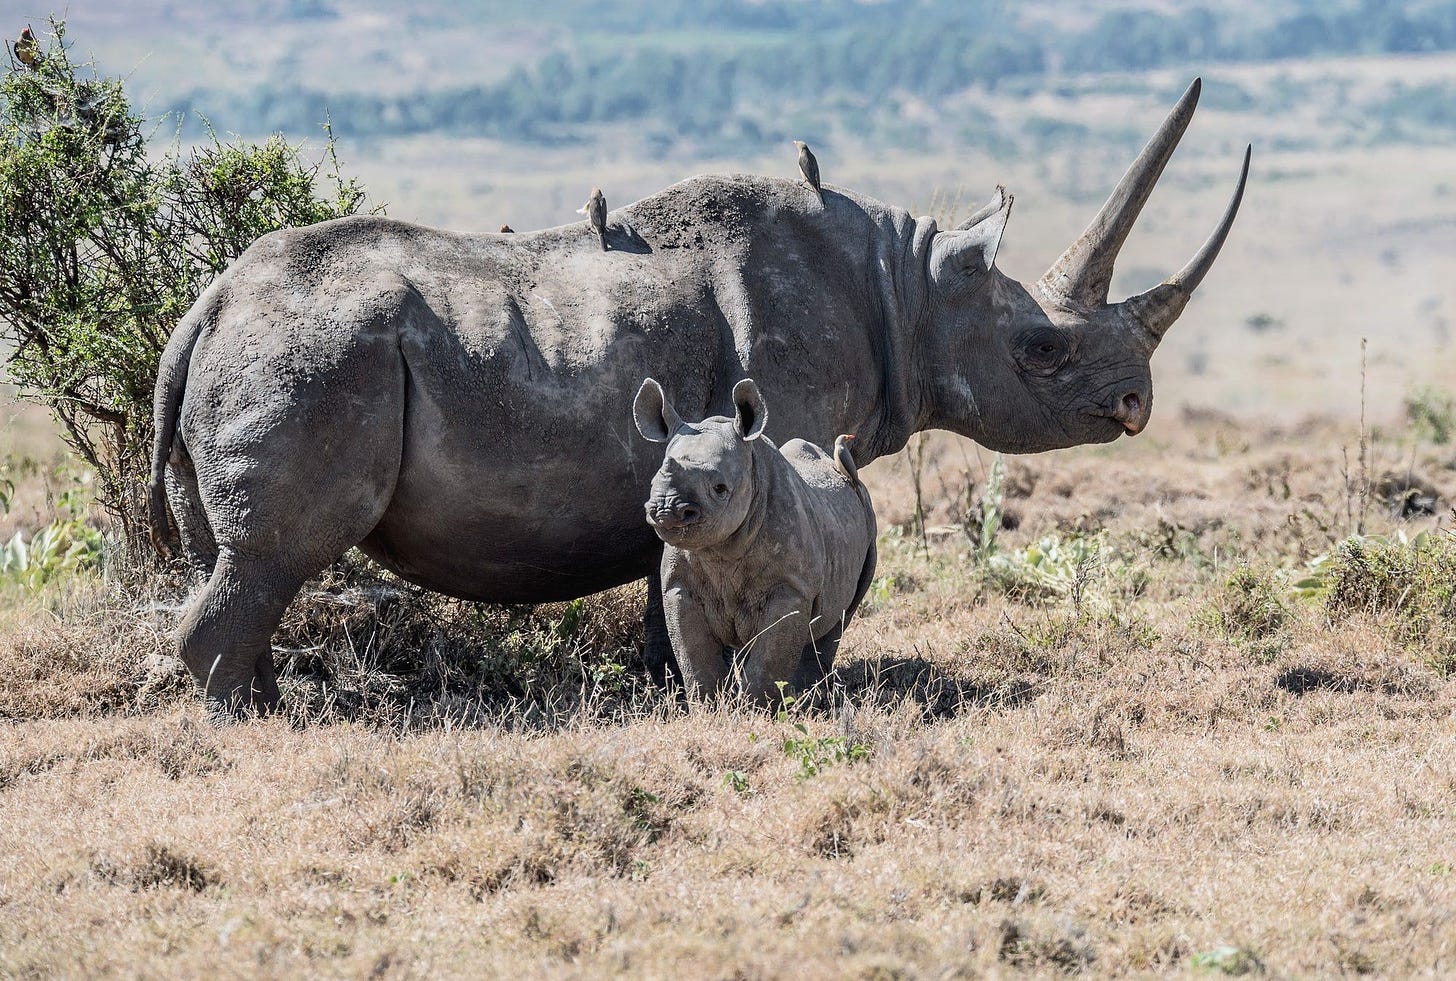 Black rhinos. A mother and baby black rhino in Lewa Conservancy ...